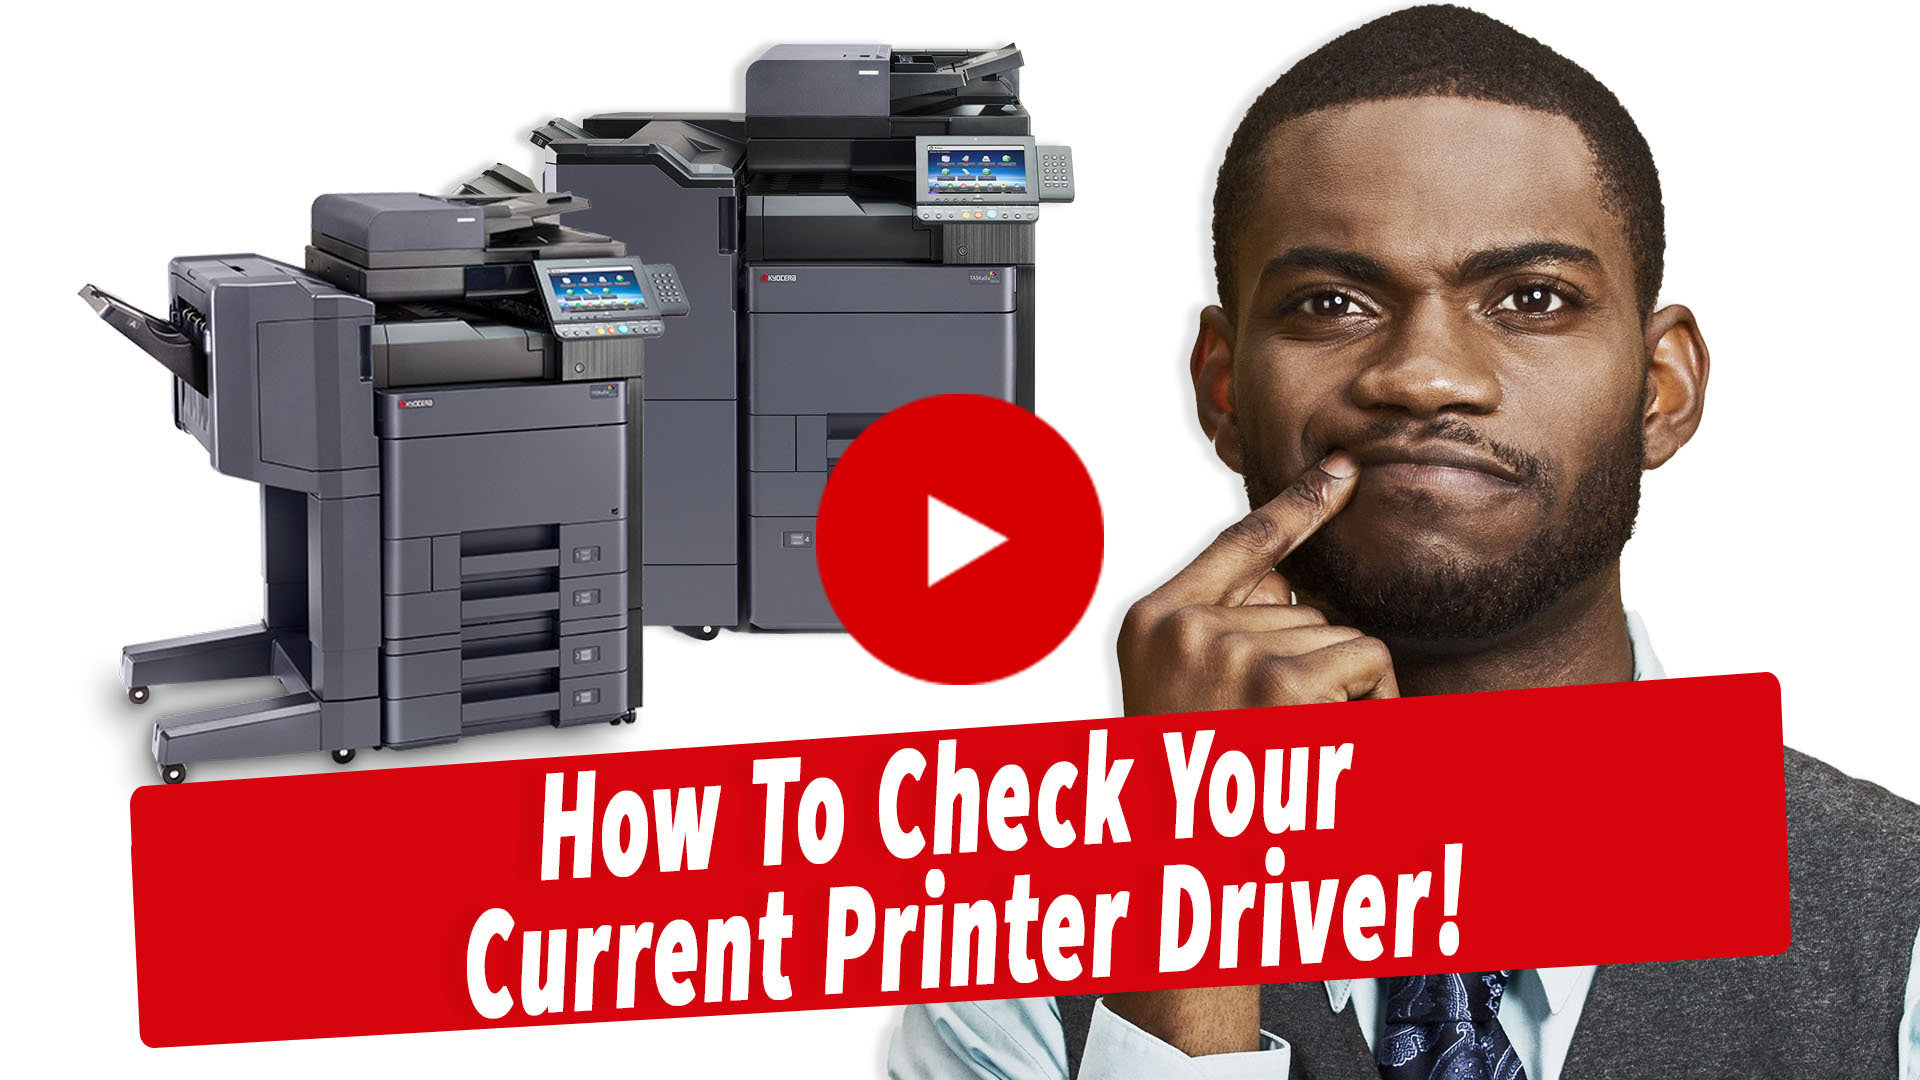 How To Check Your Current Printer Driver